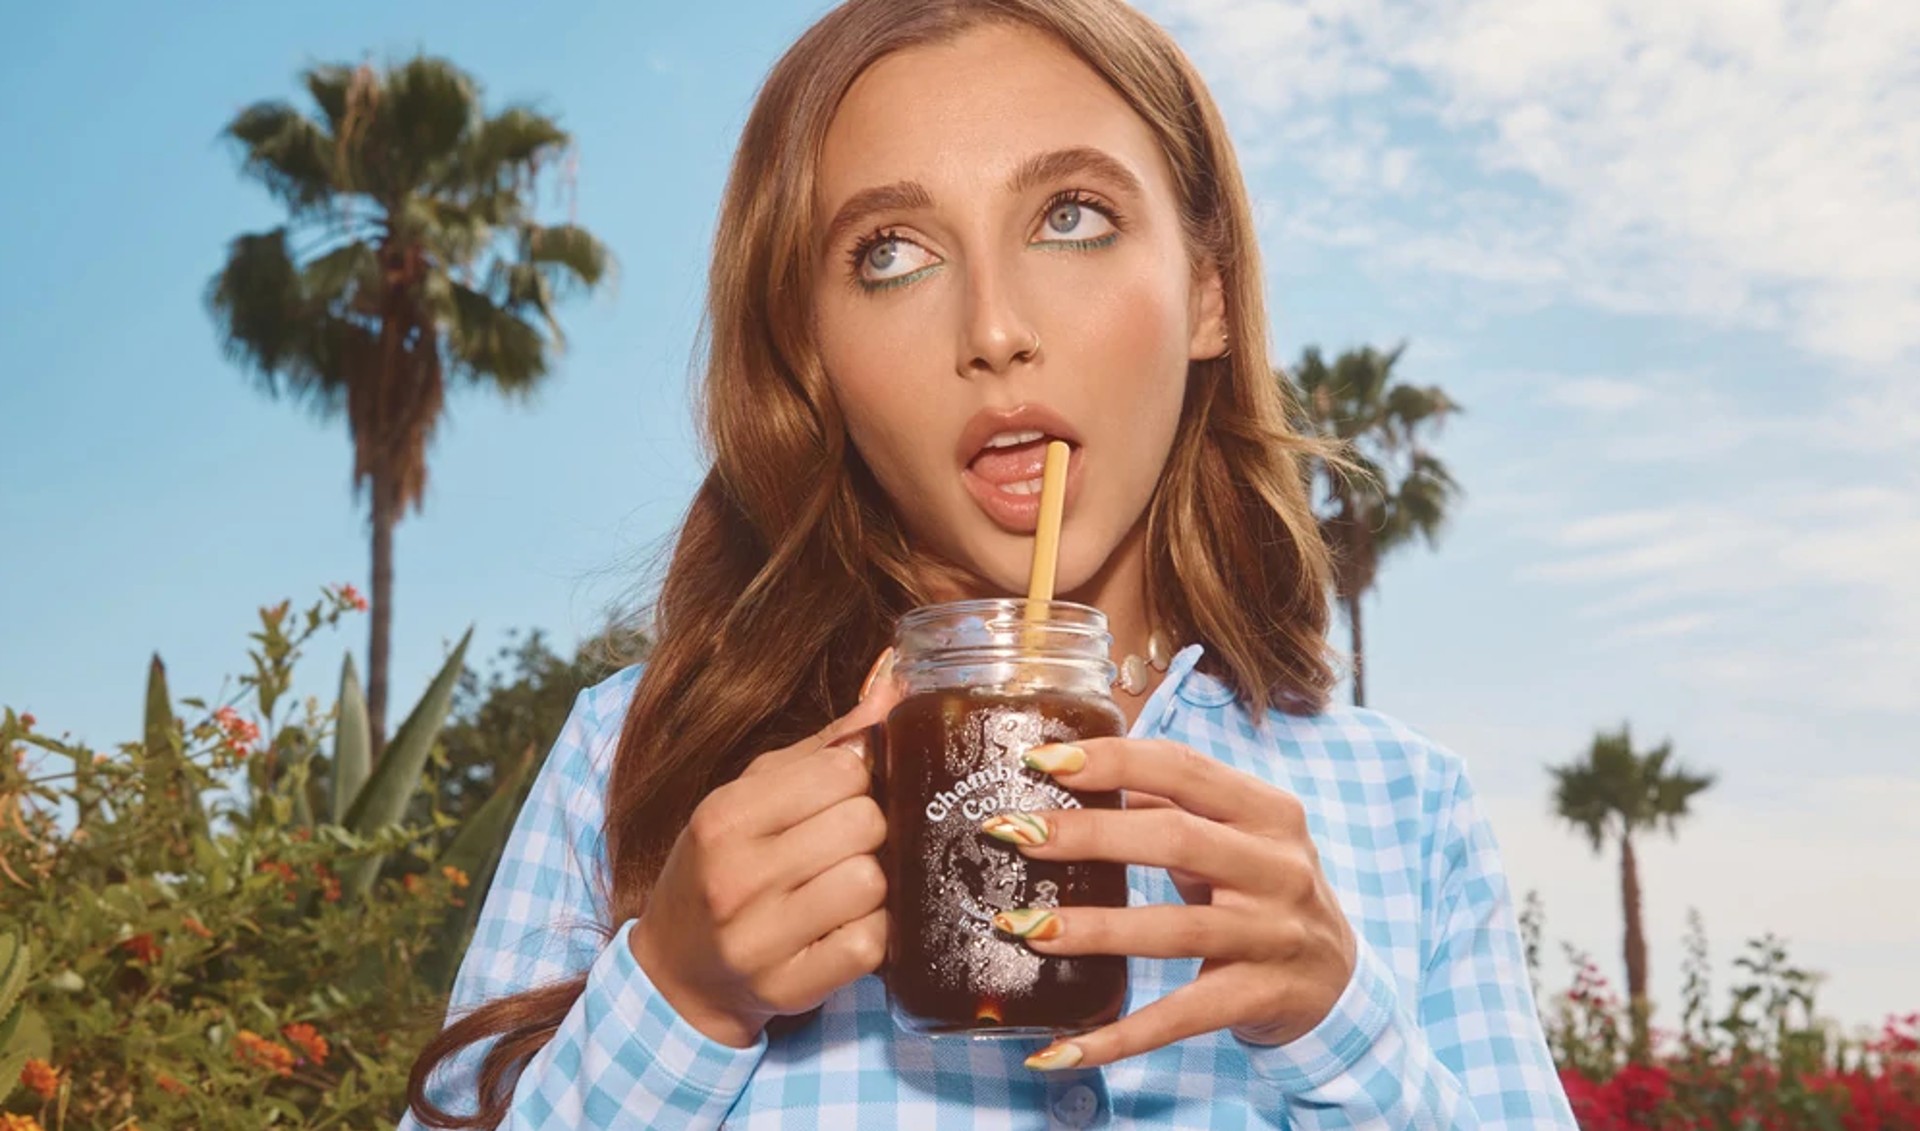 Emma Chamberlain's Coffee Brand Expands Into Hot Chocolate - Tubefilter